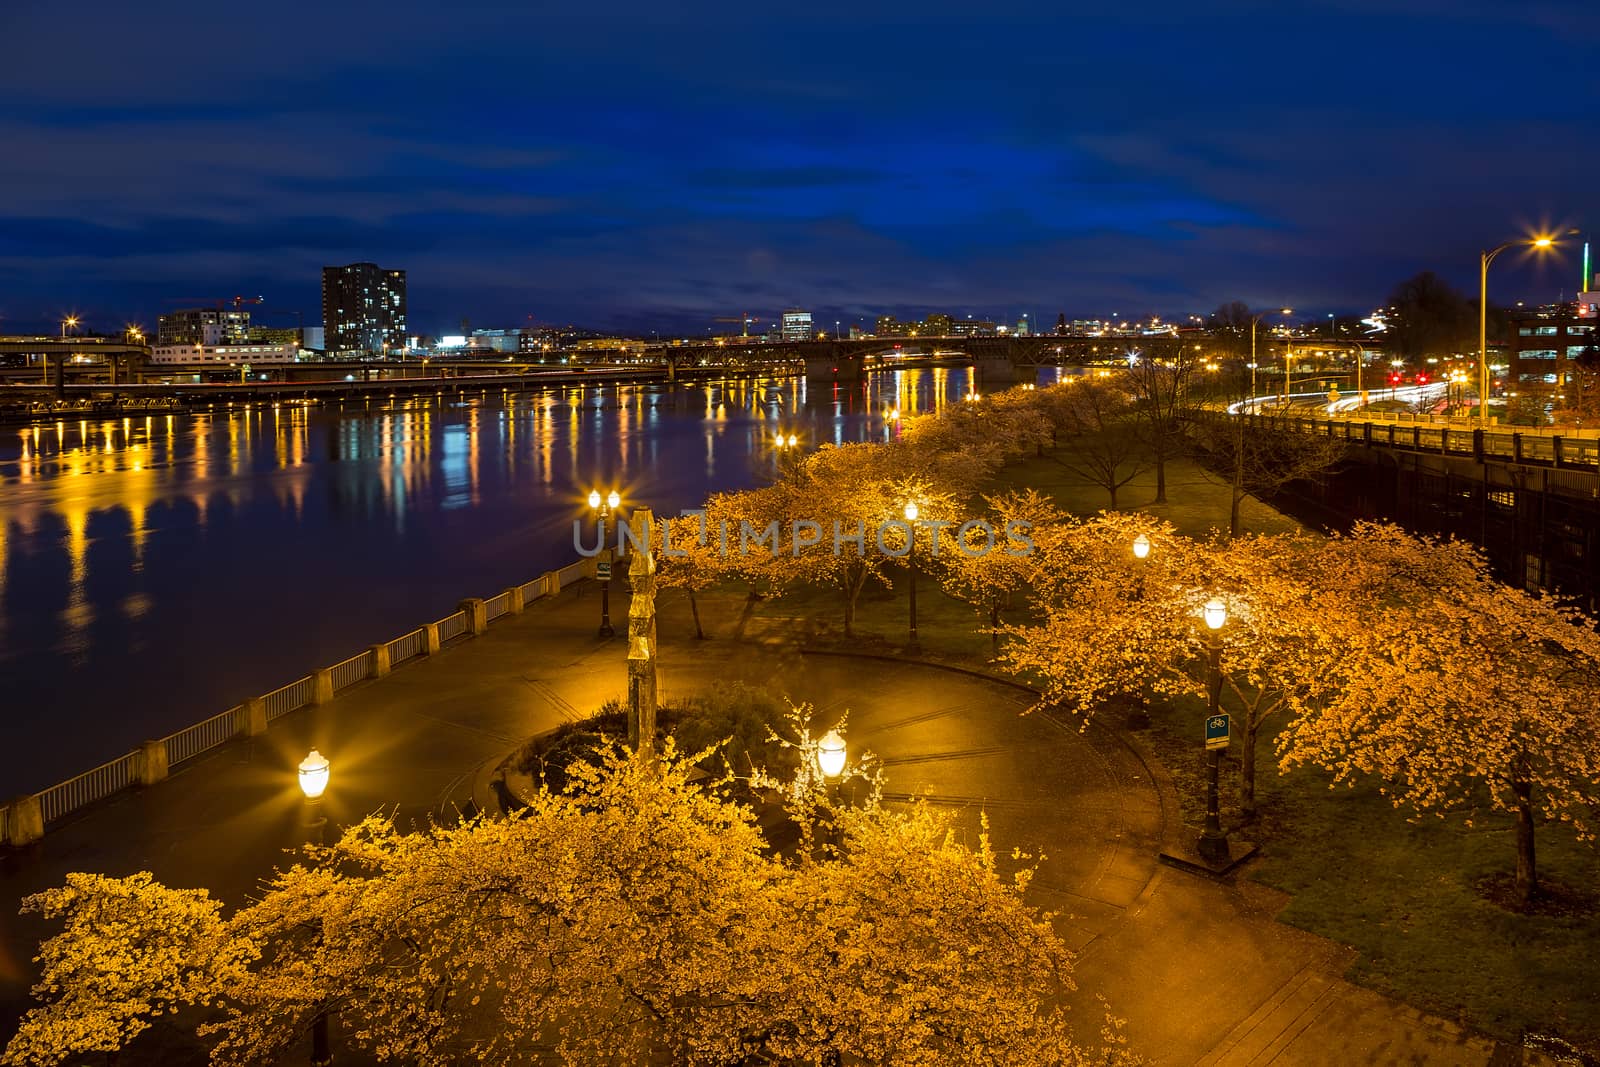 Cherry Blossom Trees at Portland Waterfront Park during Blue Hou by Davidgn